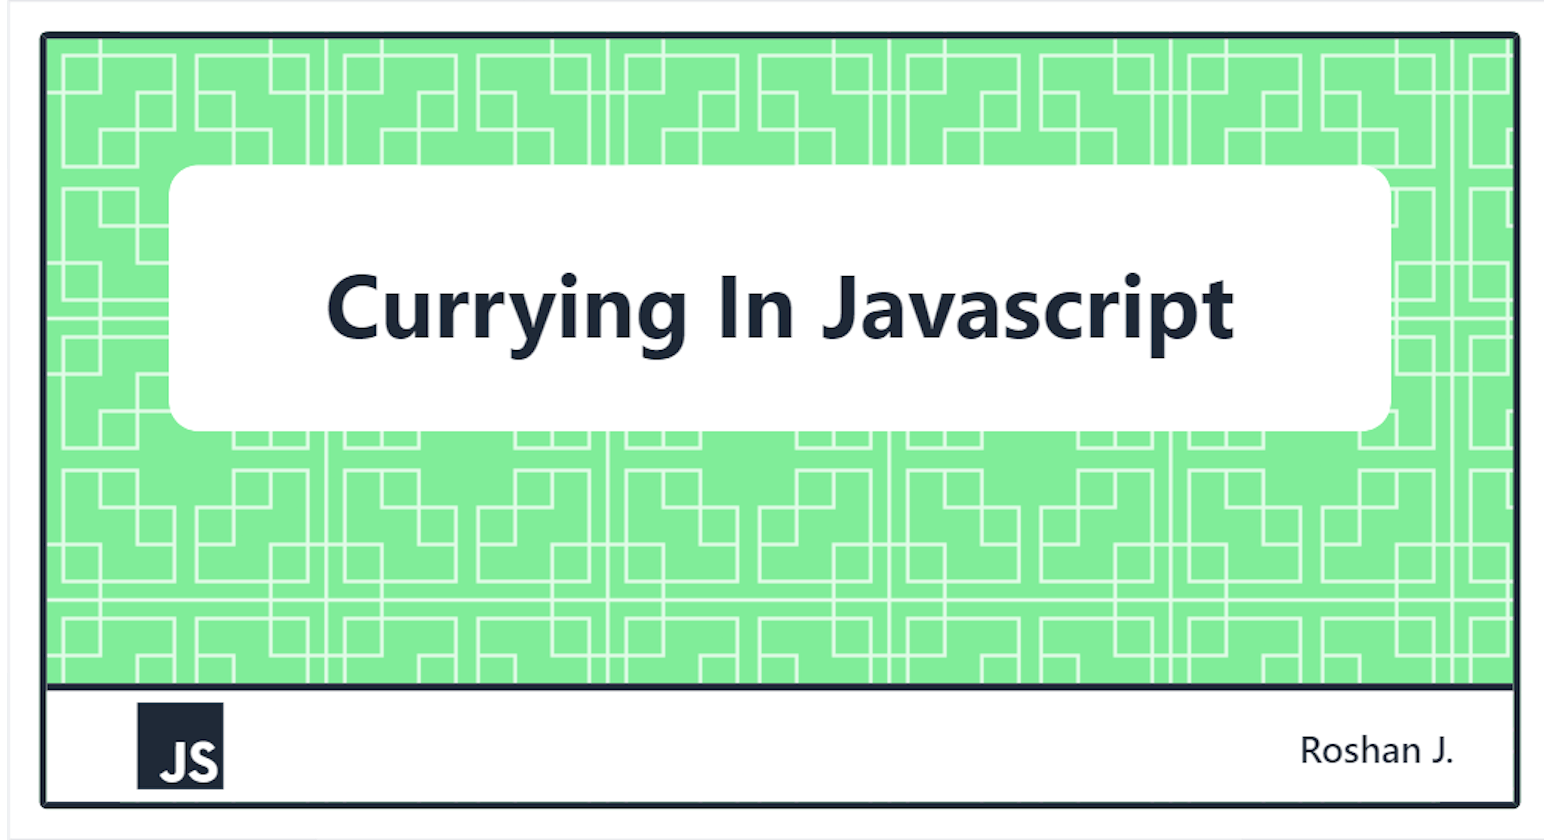 Currying in Javascript